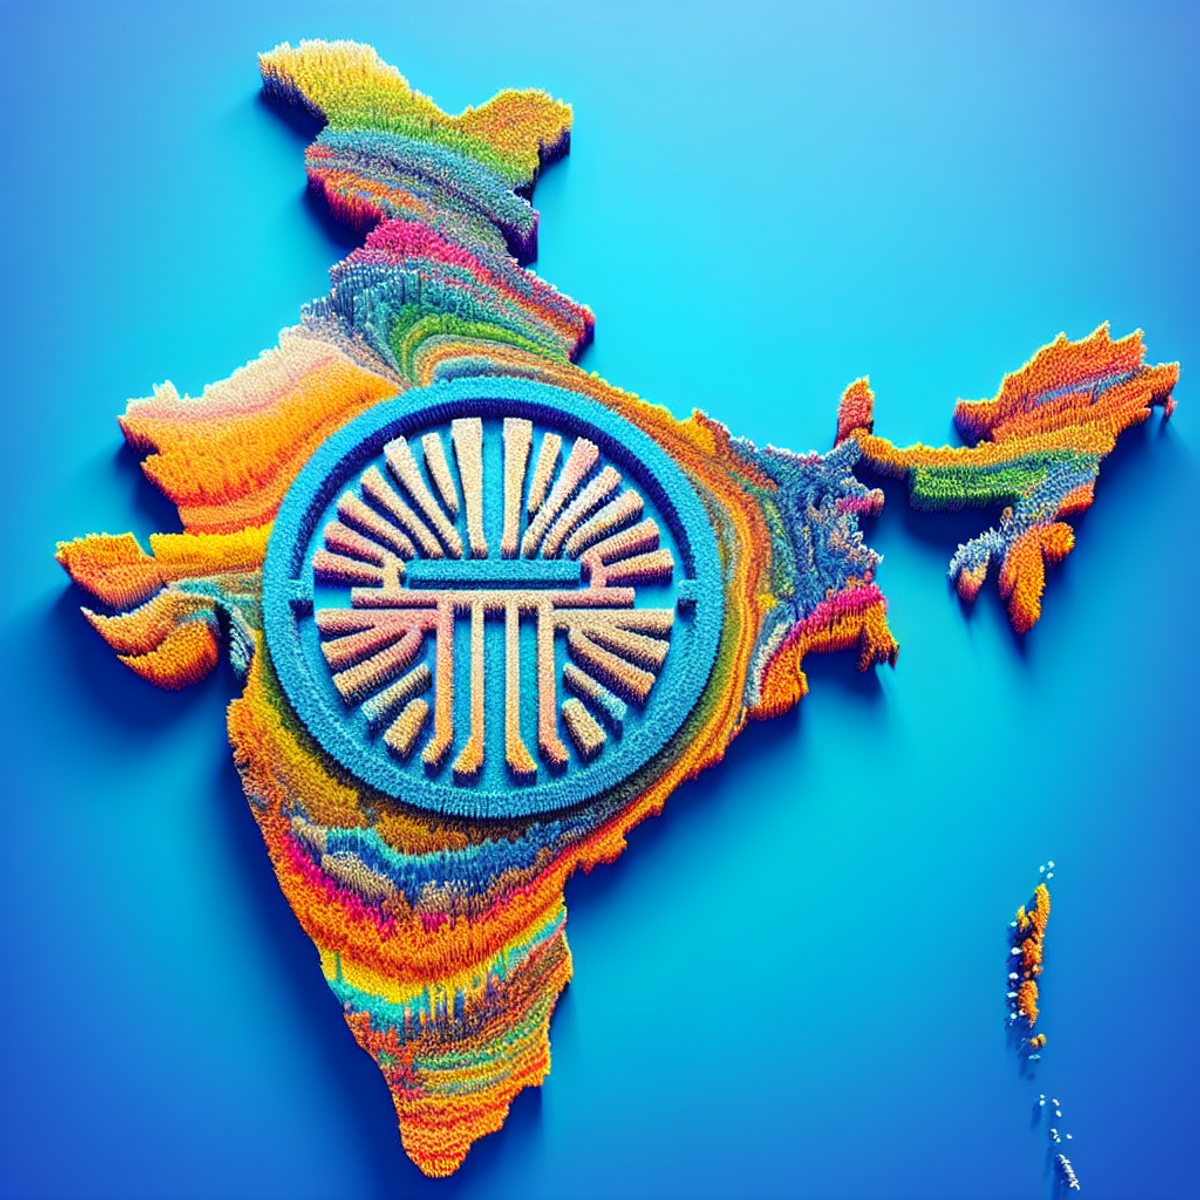 A vibrant, colorful map of India with the State Bank of India's iconic logo spread across it.